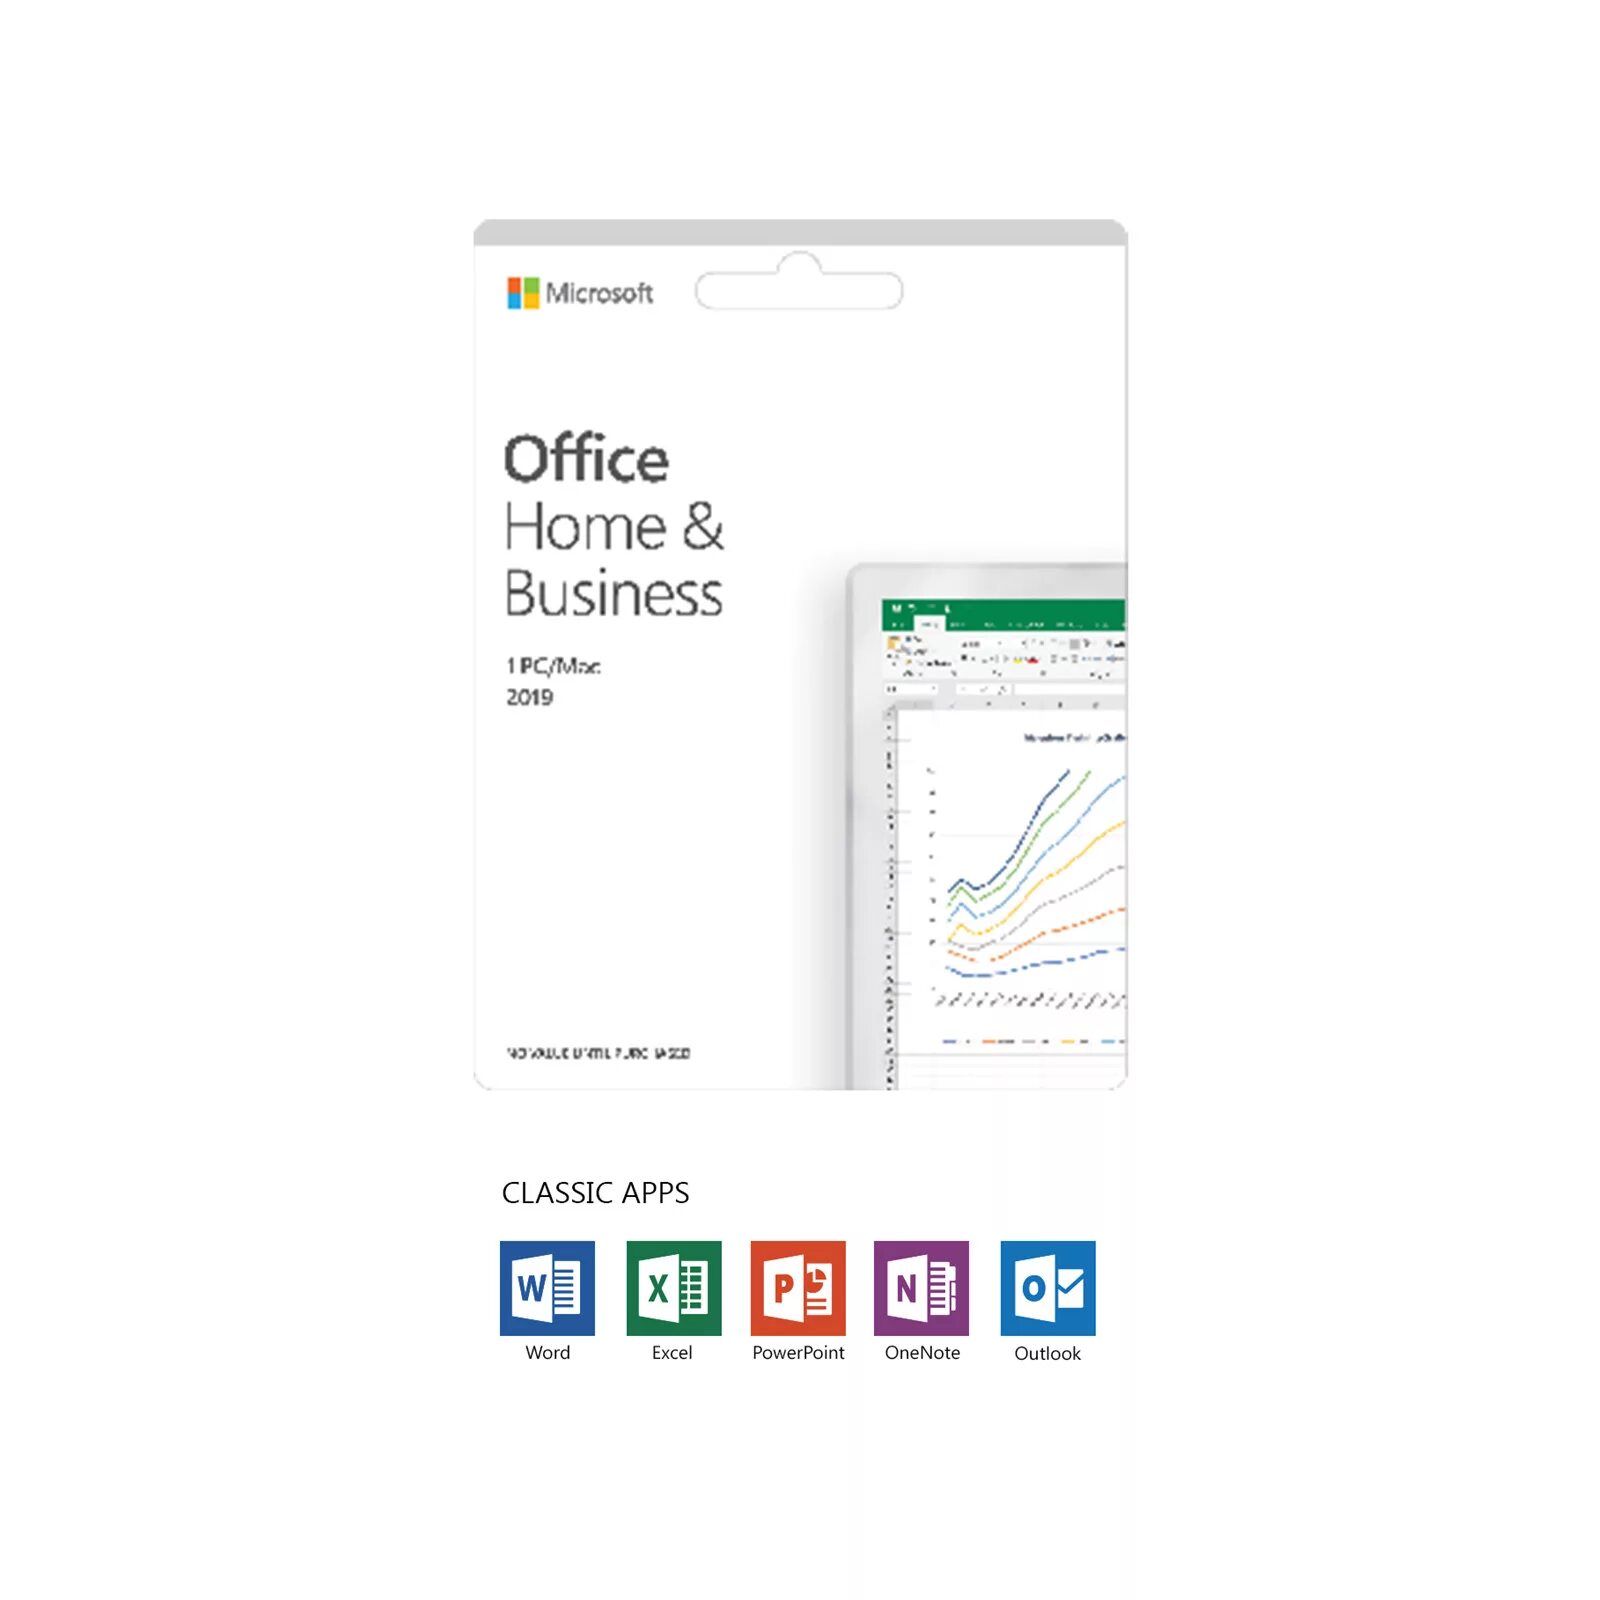 Microsoft Office 2019 Home and Business for Mac. Office 2021 Home and Business Mac. MS Office 2019 Home and Business. Microsoft Office 2019 Home and Business, Box.